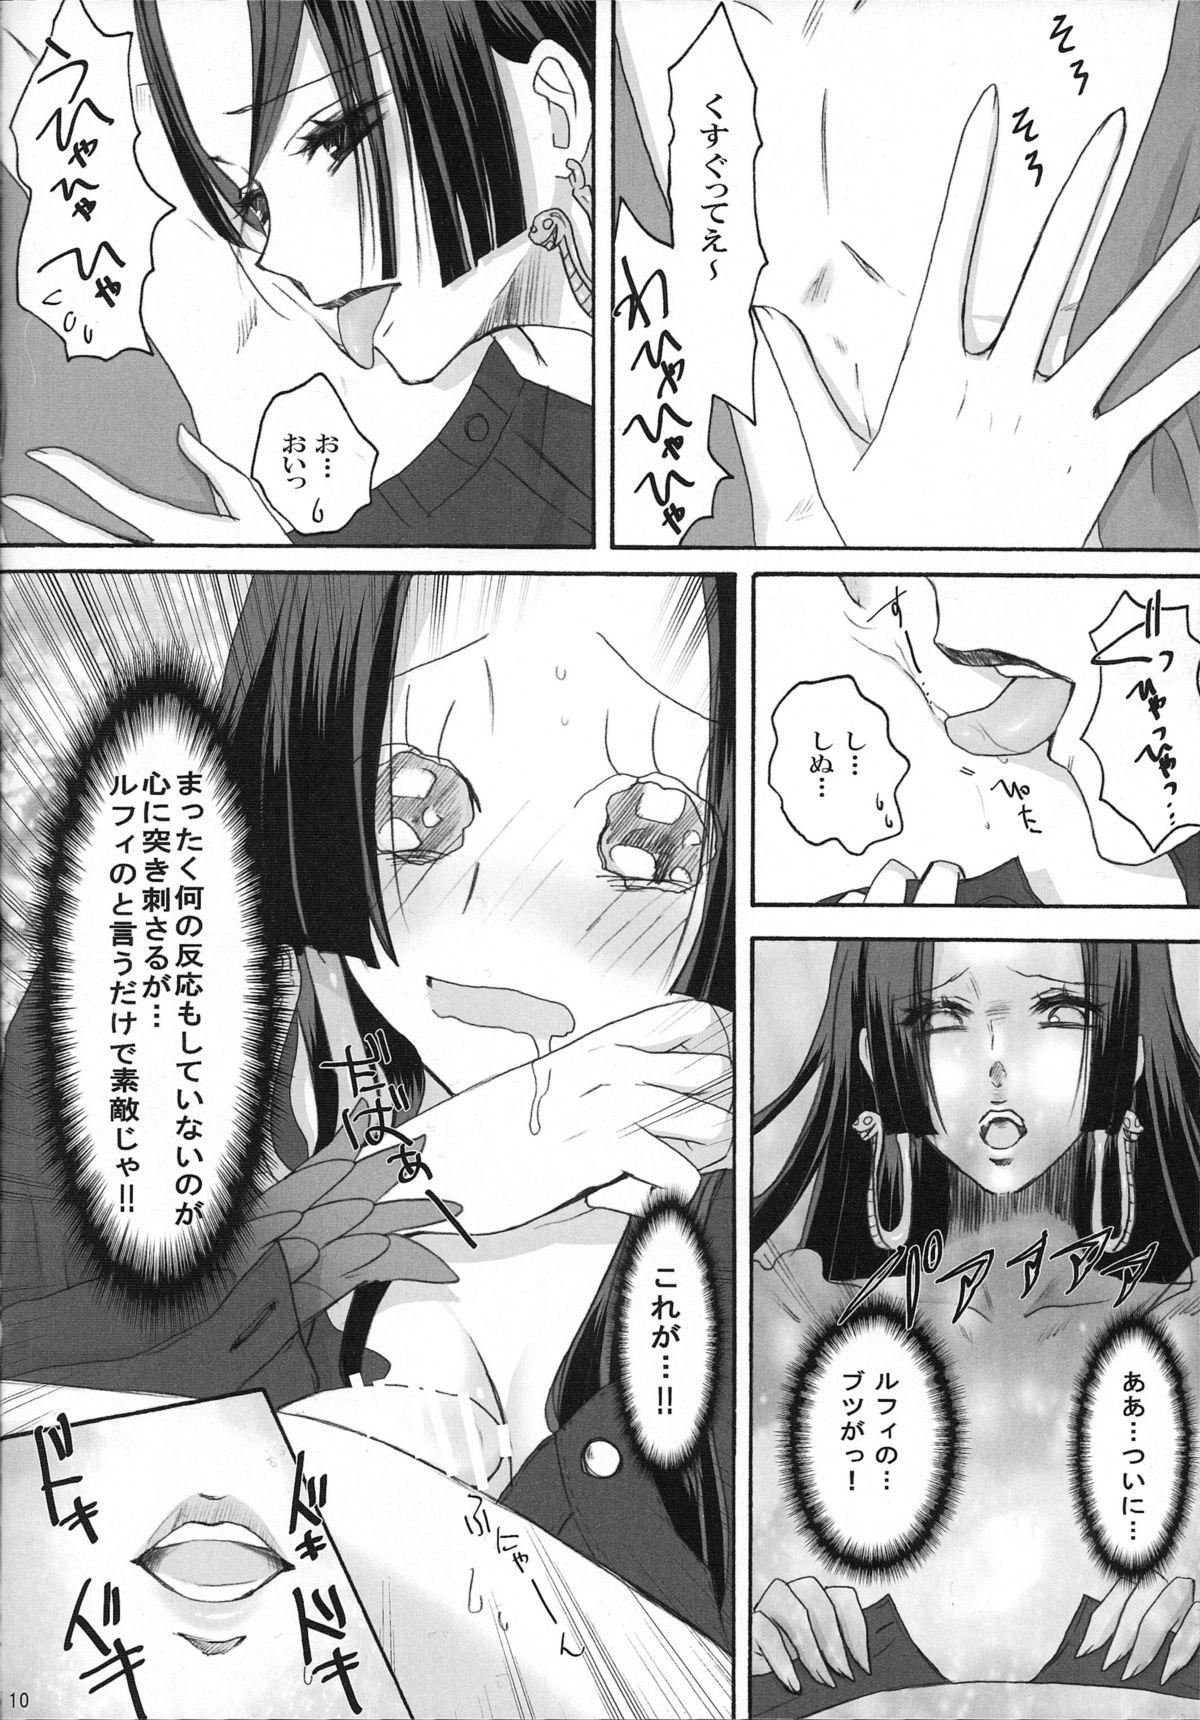 Pigtails Hebihime wa Itsudemo Hurricane - One piece Old And Young - Page 9